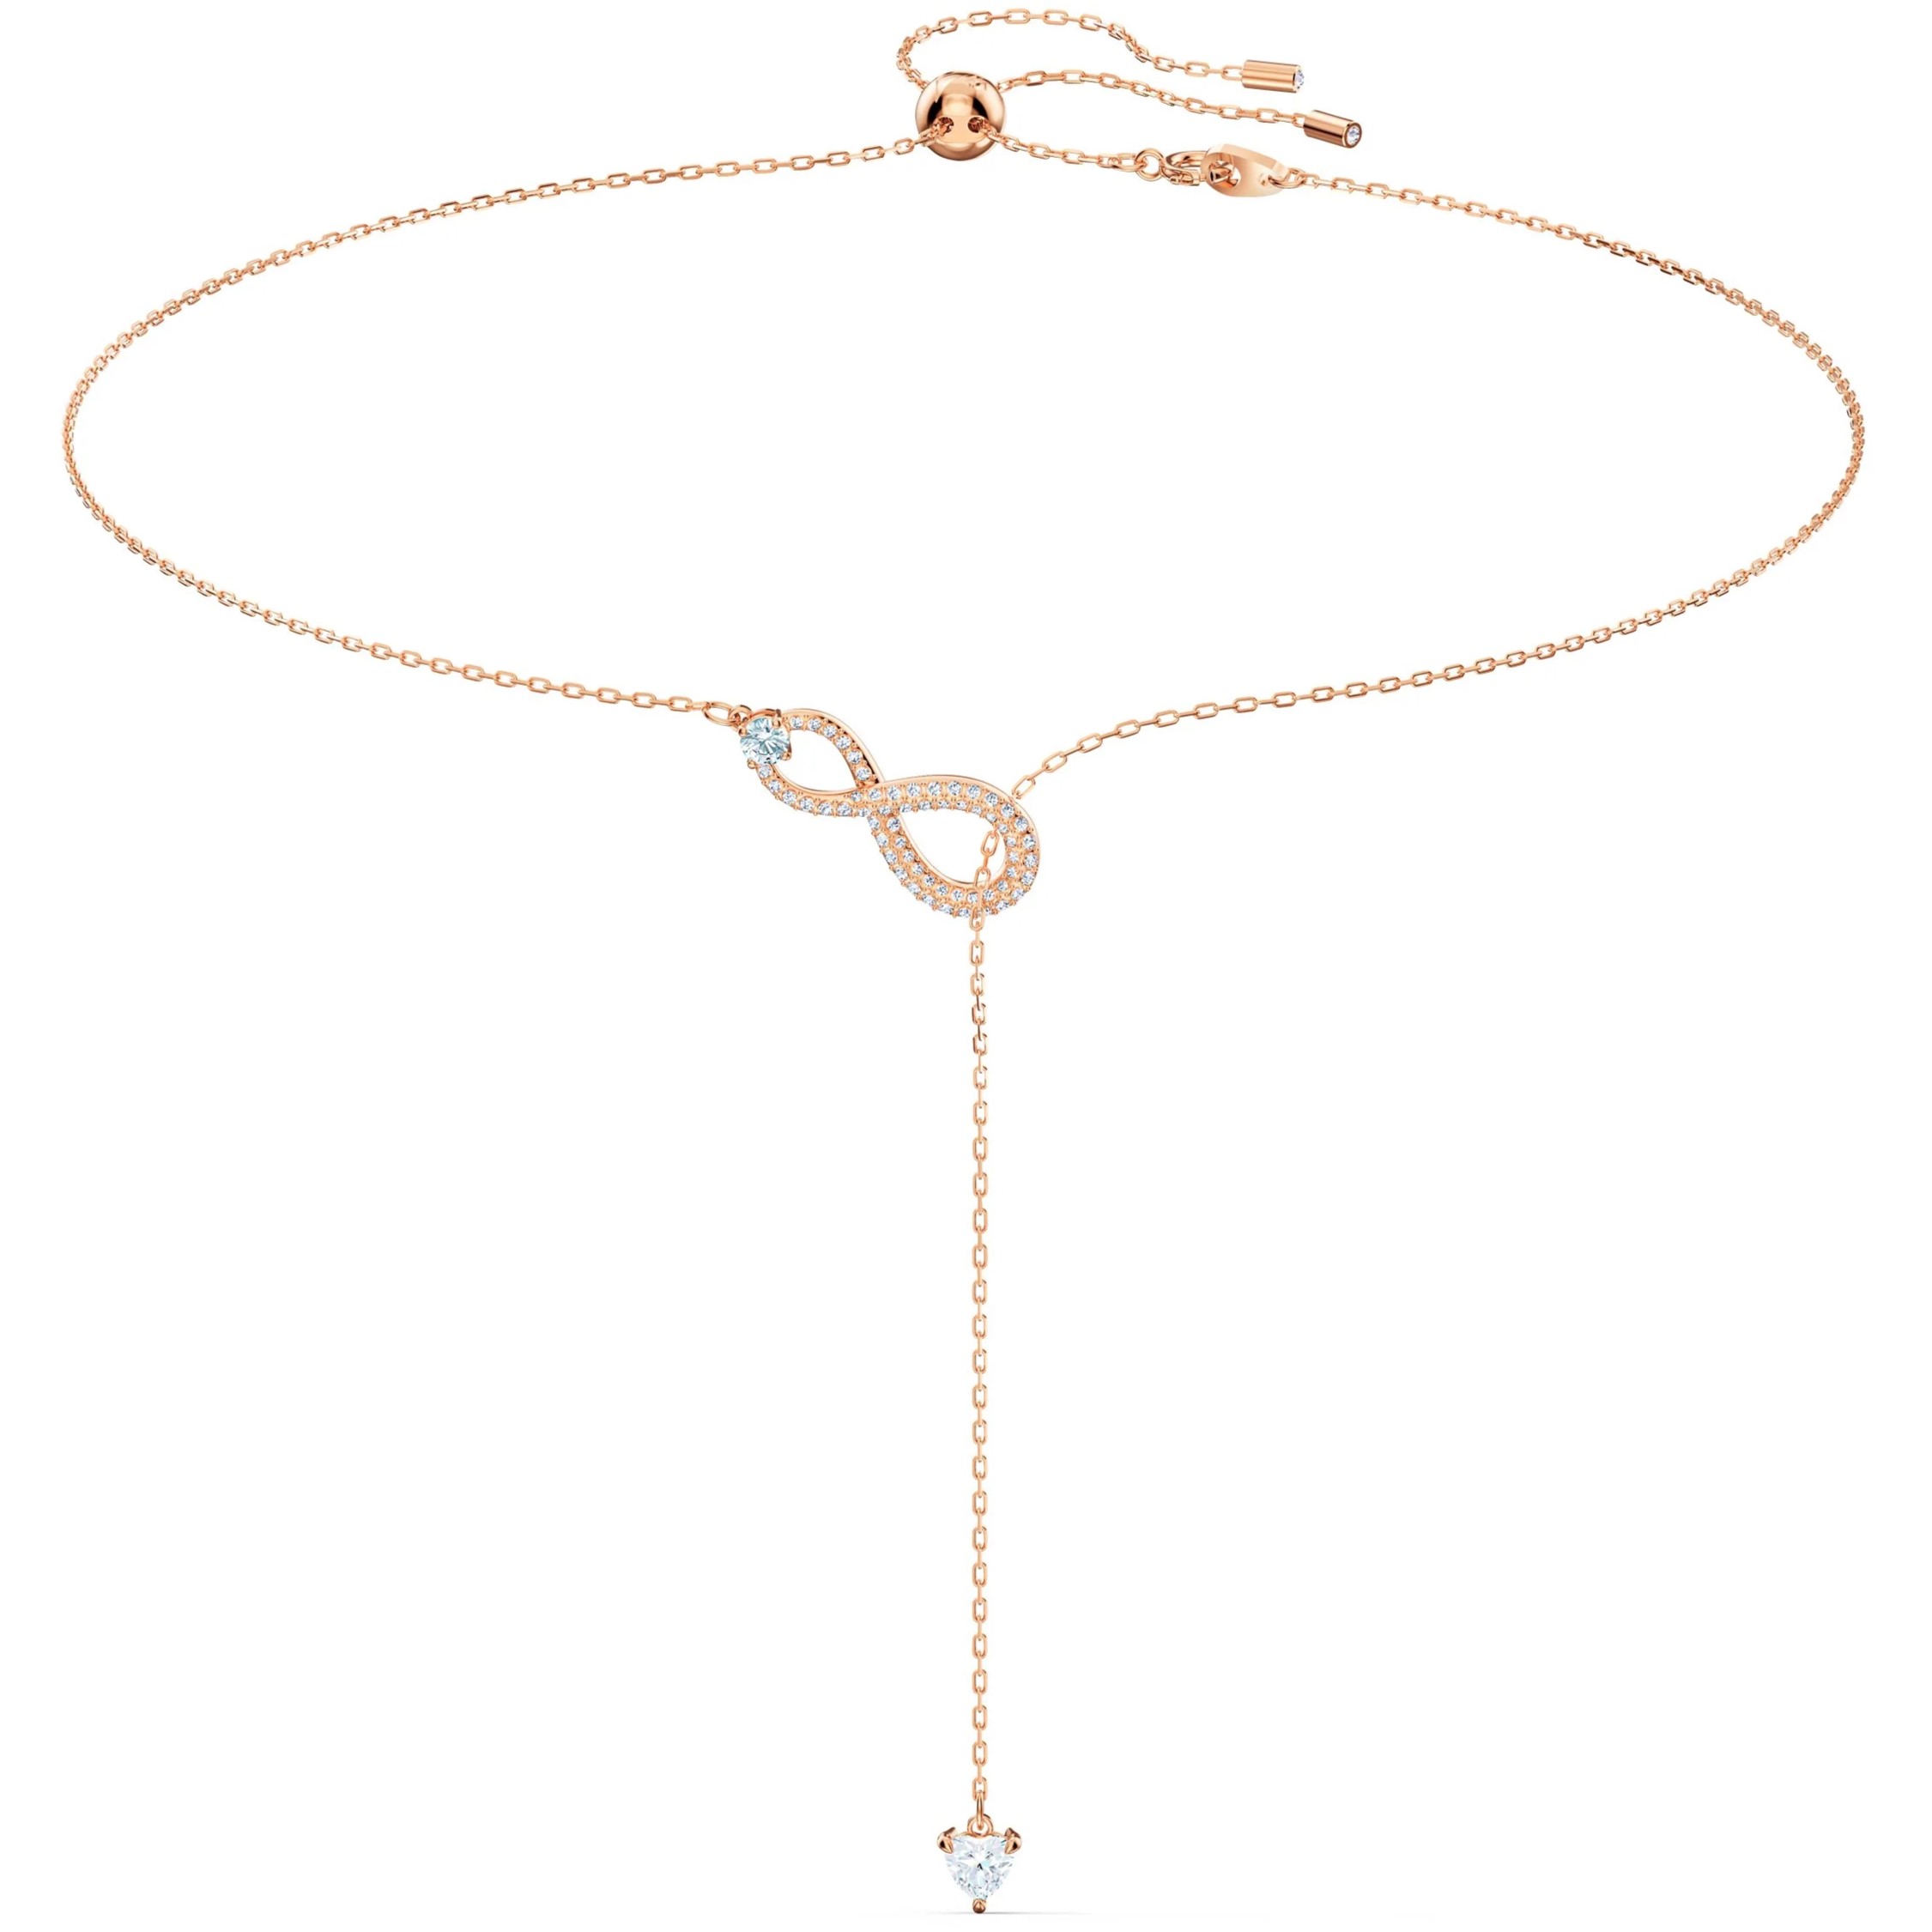 DÂY CHUYỀN SWAROVSKI INFINITY Y NECKLACE WHITE ROSE GOLD-TONE PLATED 5521346 7